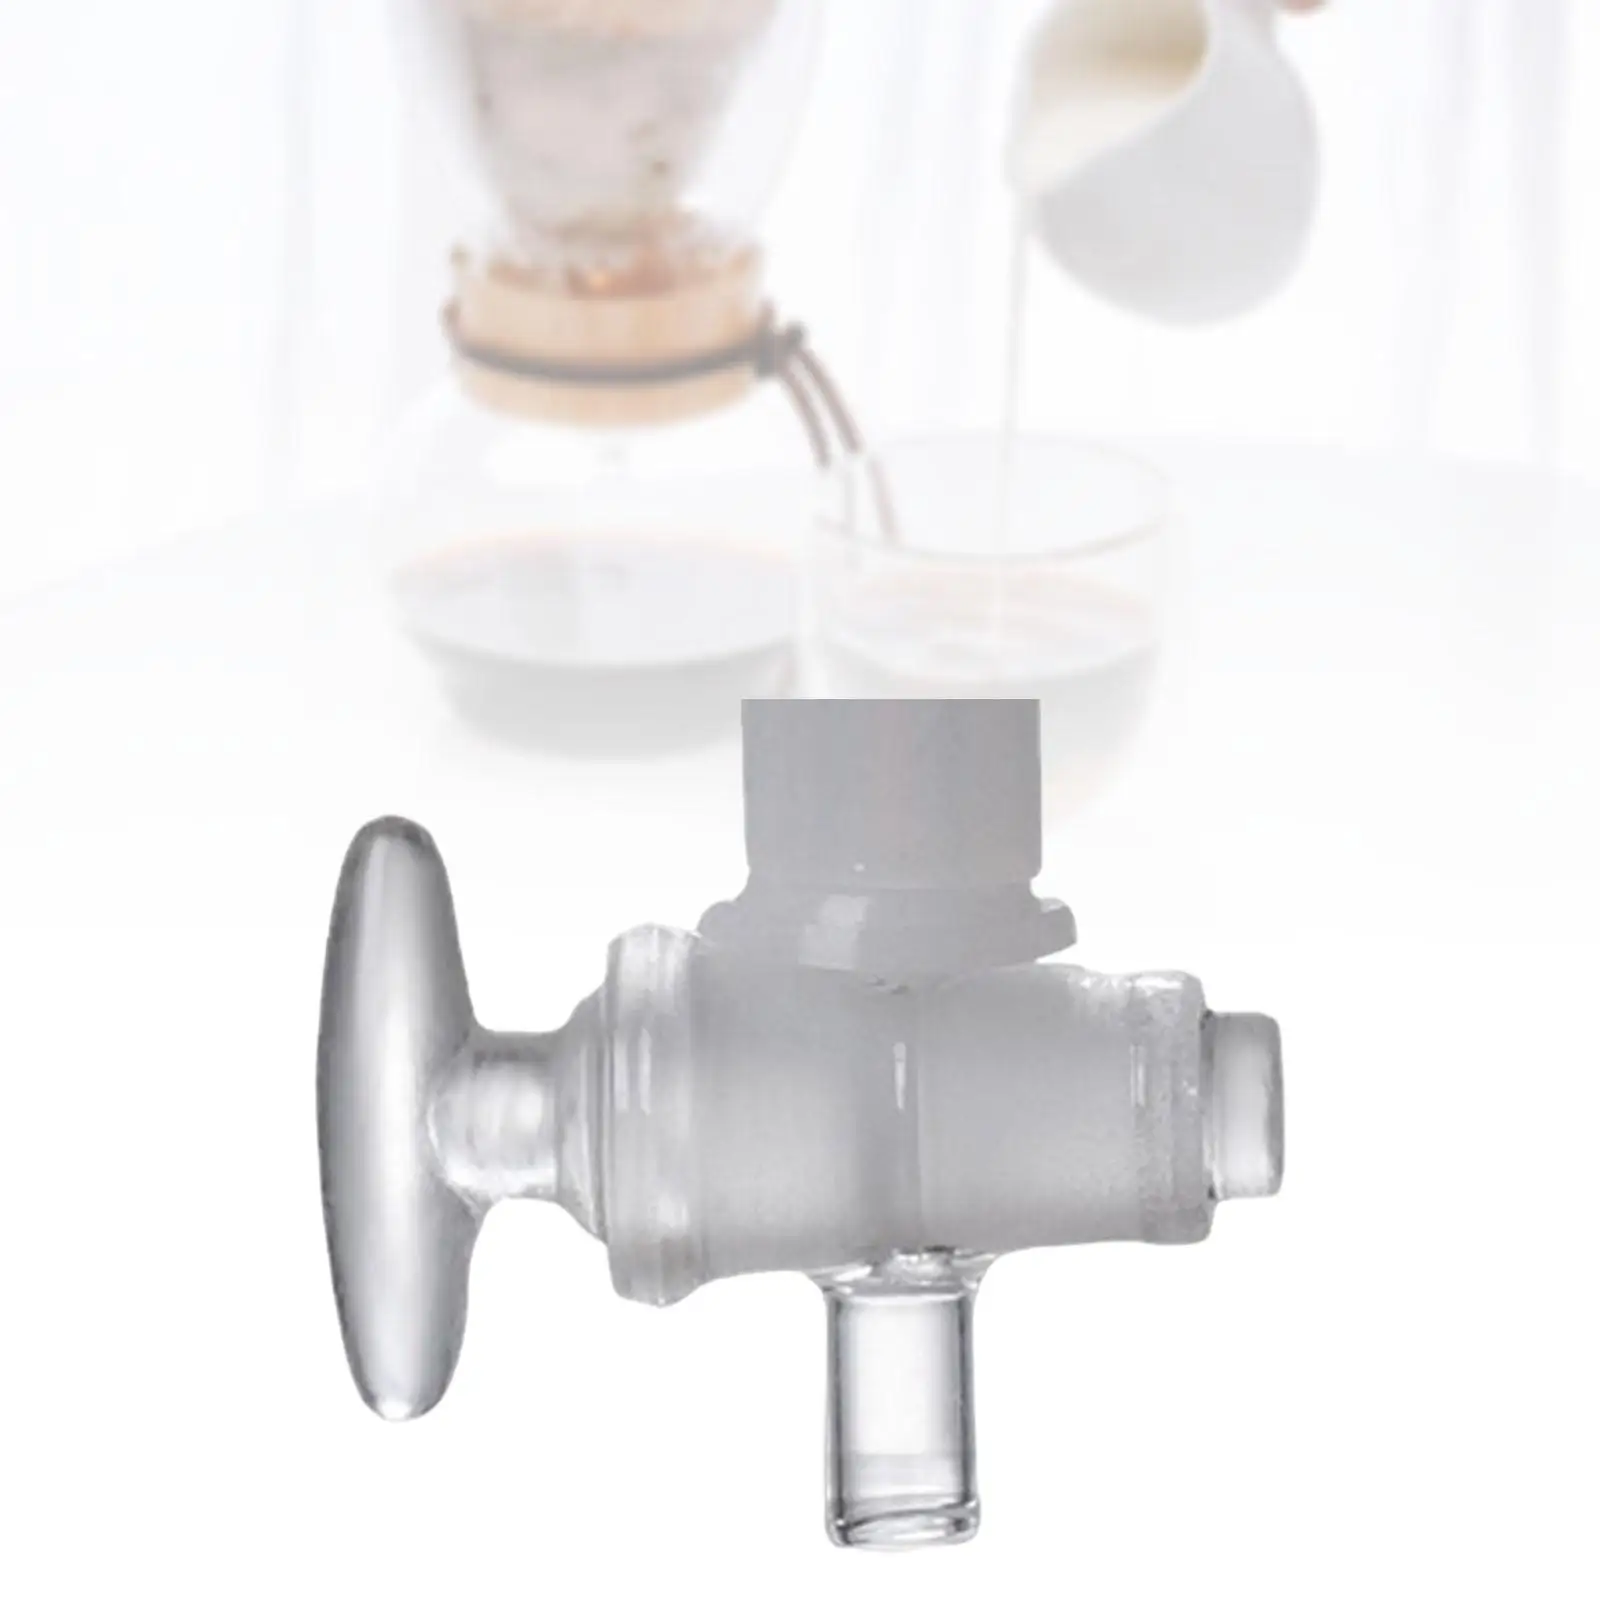 Reusable Ice Cold Brew Dripper Coffee Maker coffee Filter Tool Cold Brew Coffee Maker Valve for Replacement Accessory